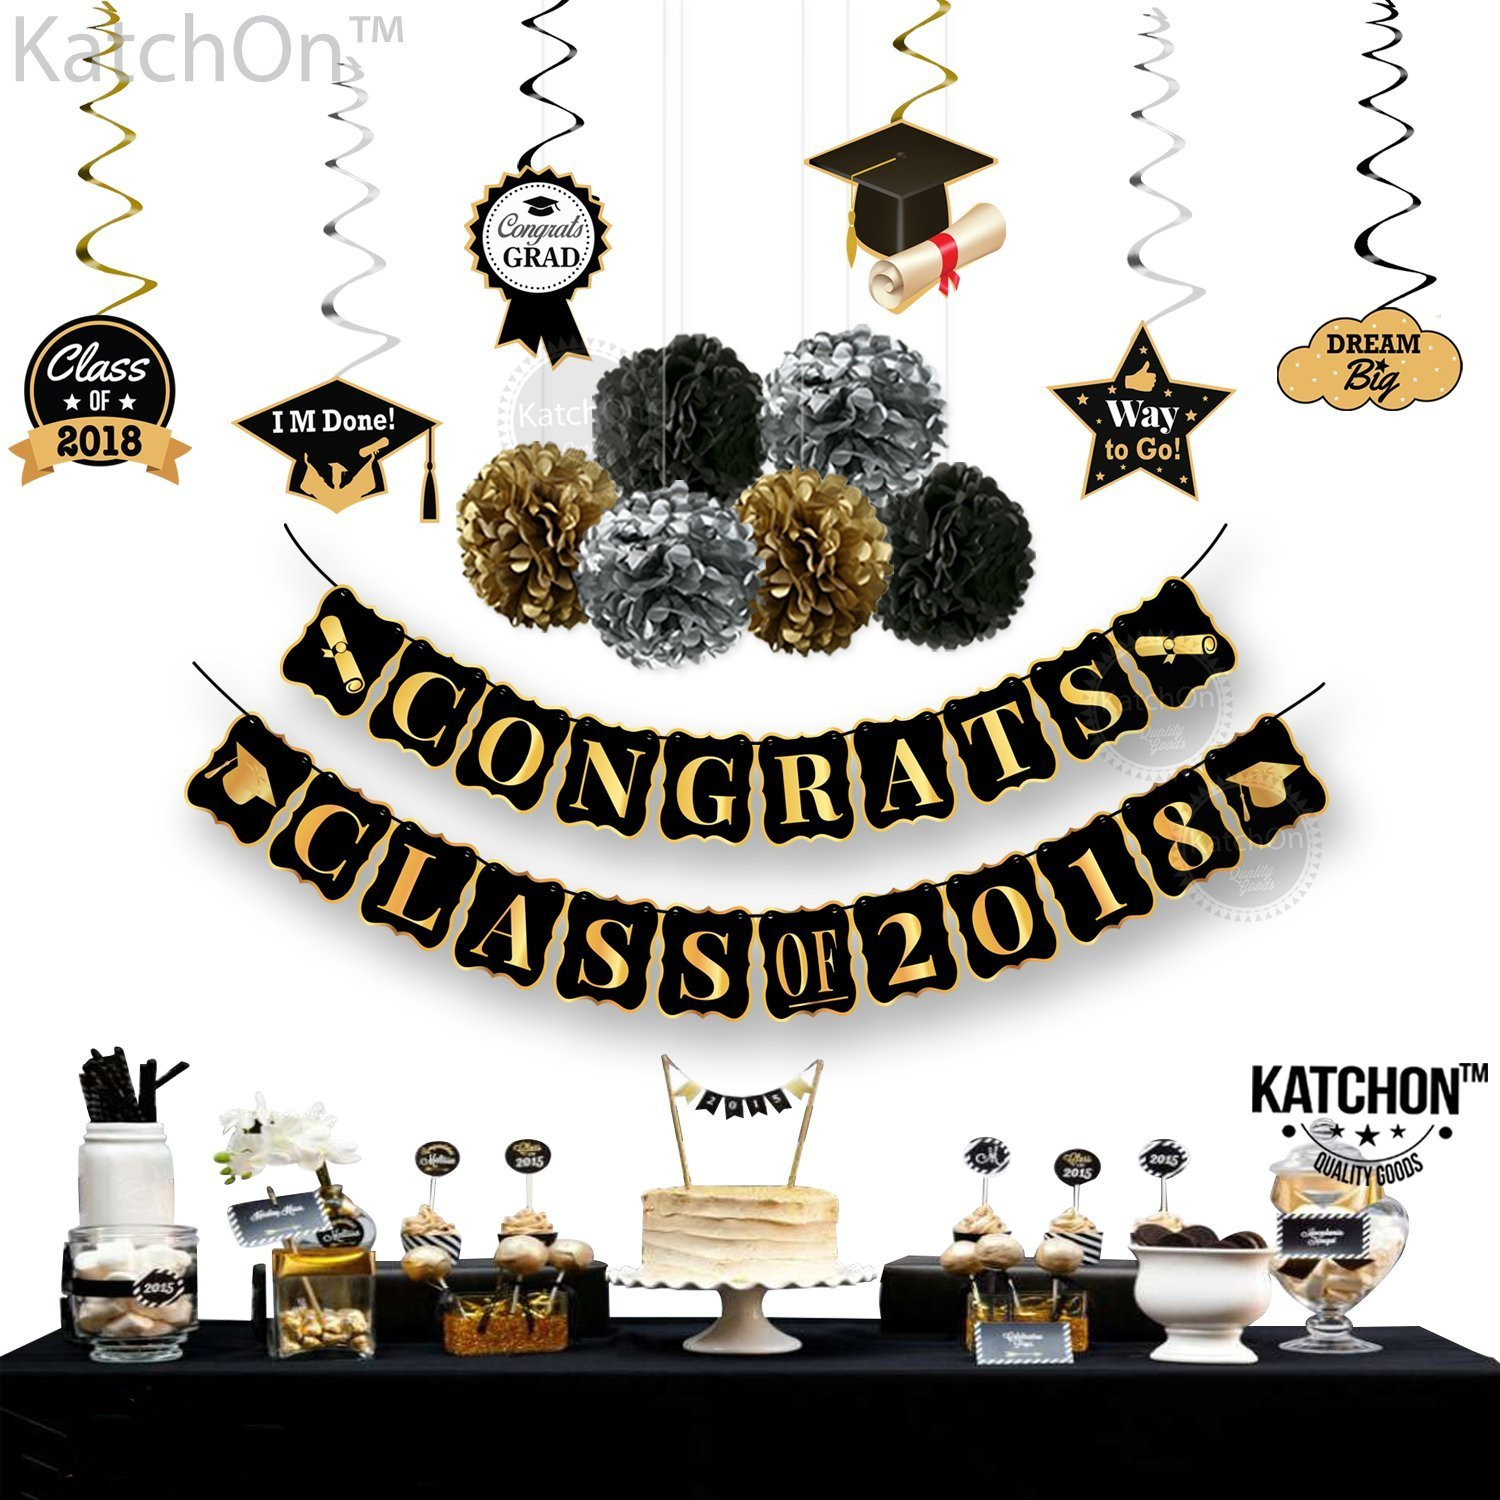 Formal Graduation Party Ideas
 Congrats Class of 2018 and Hanging Swirls Kit Assembled